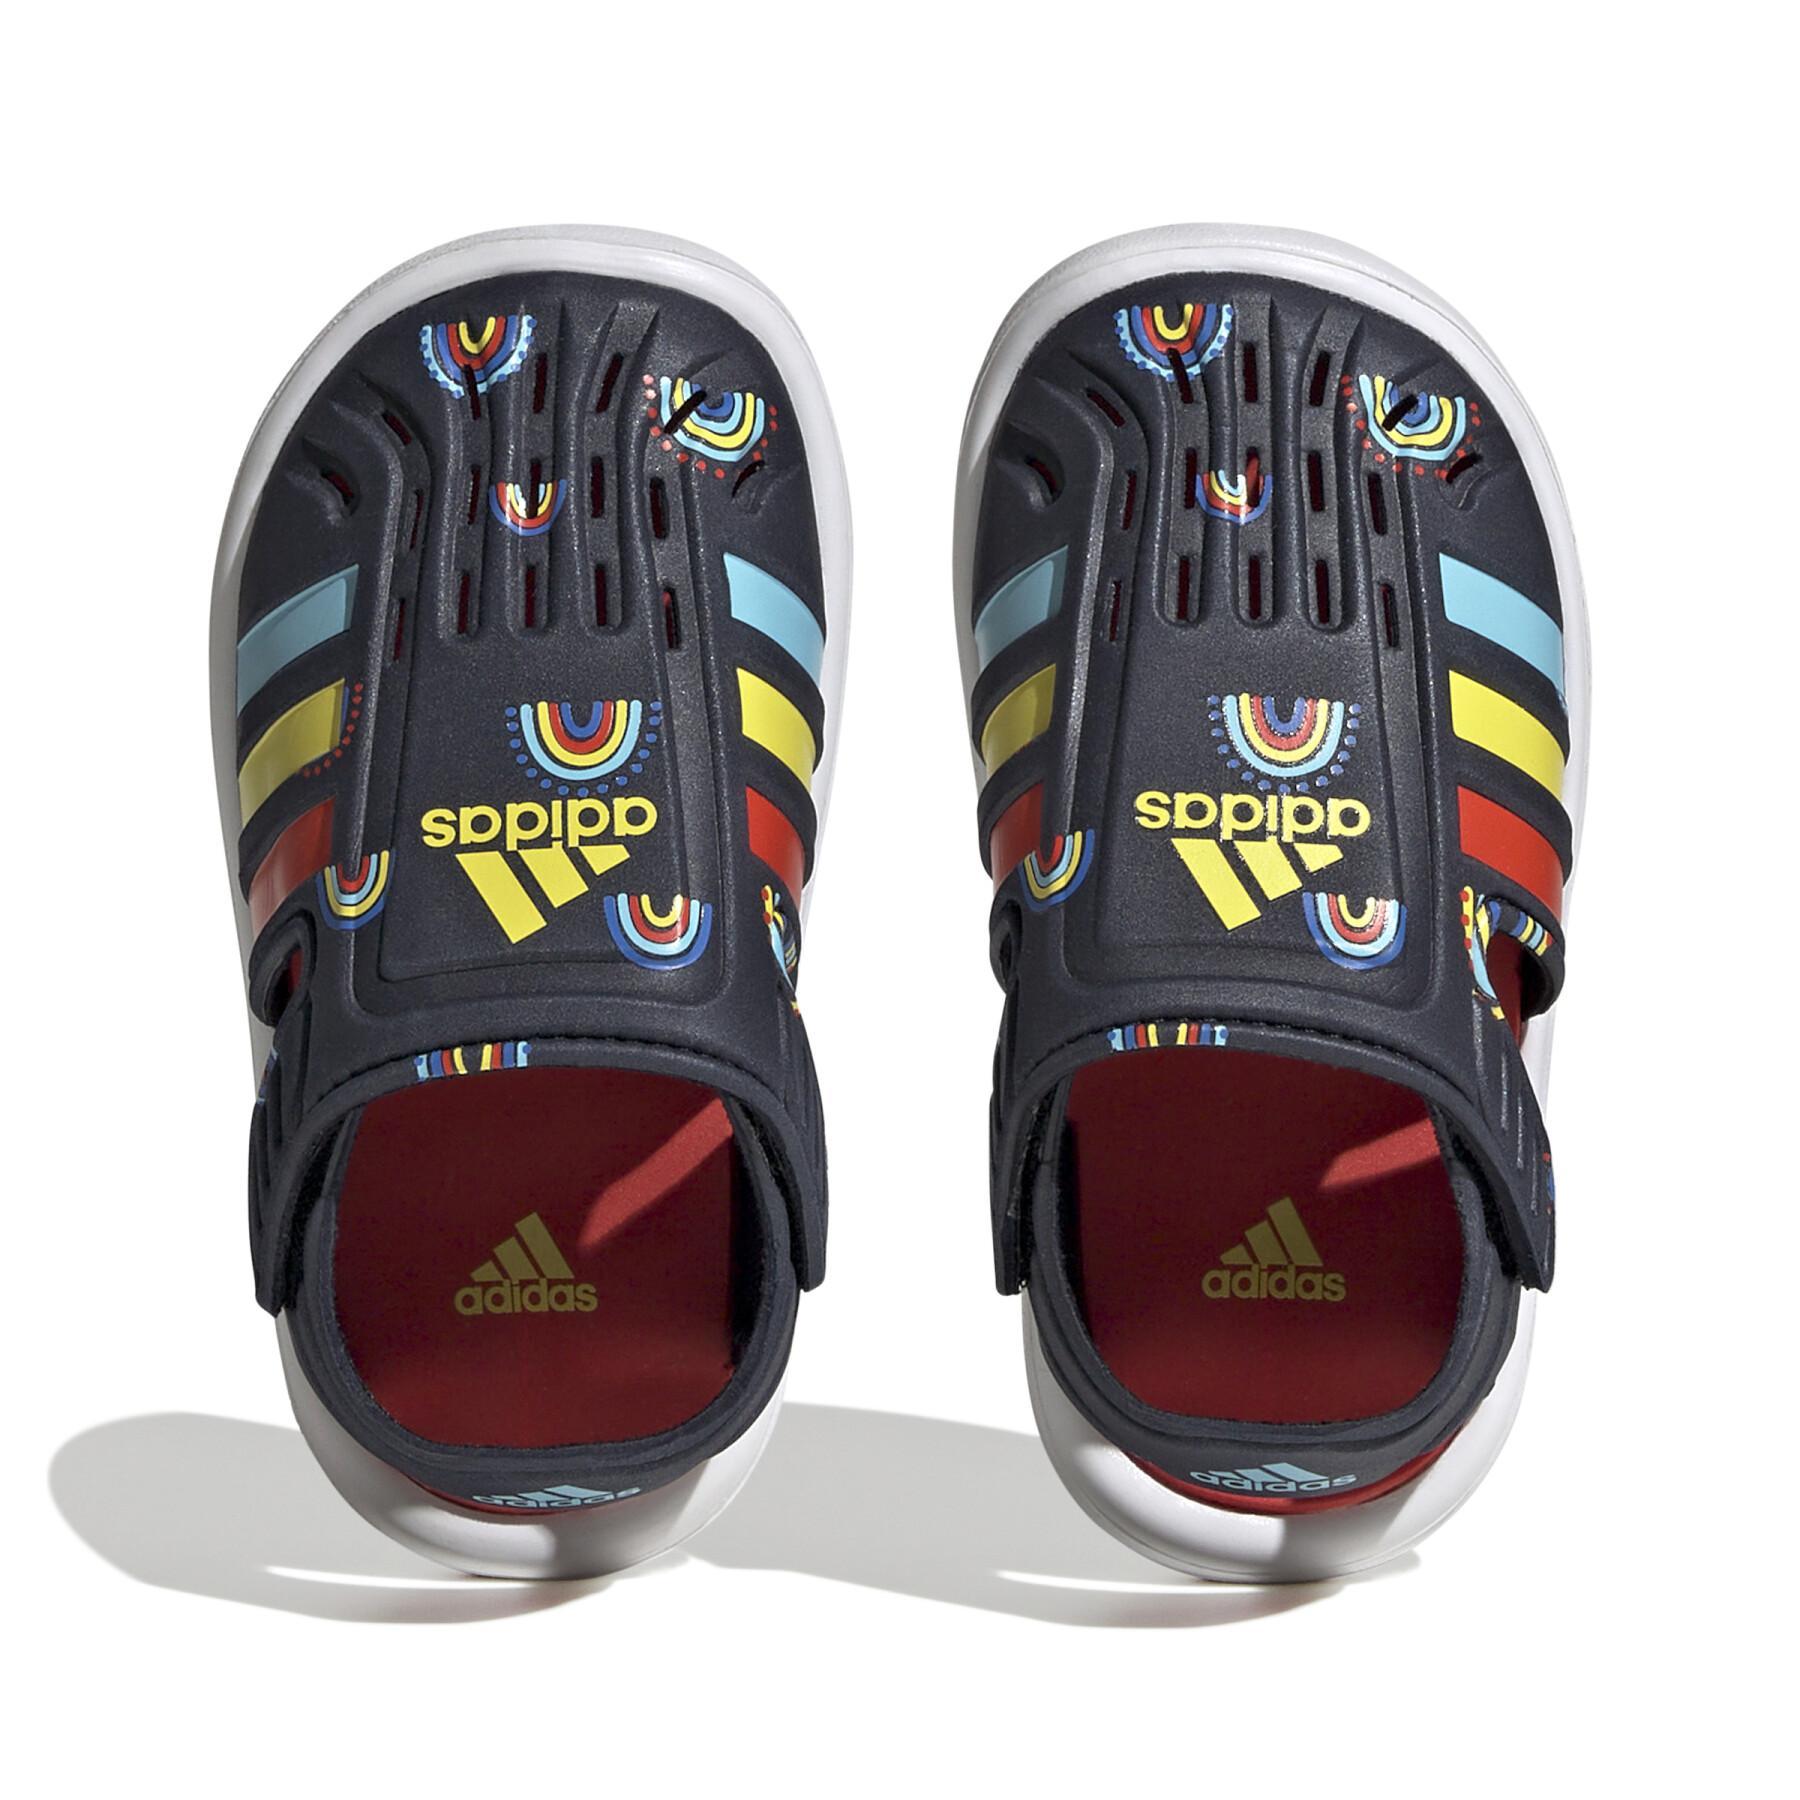 Summer sandals closed toe baby adidas - adidas - Brands - Lifestyle